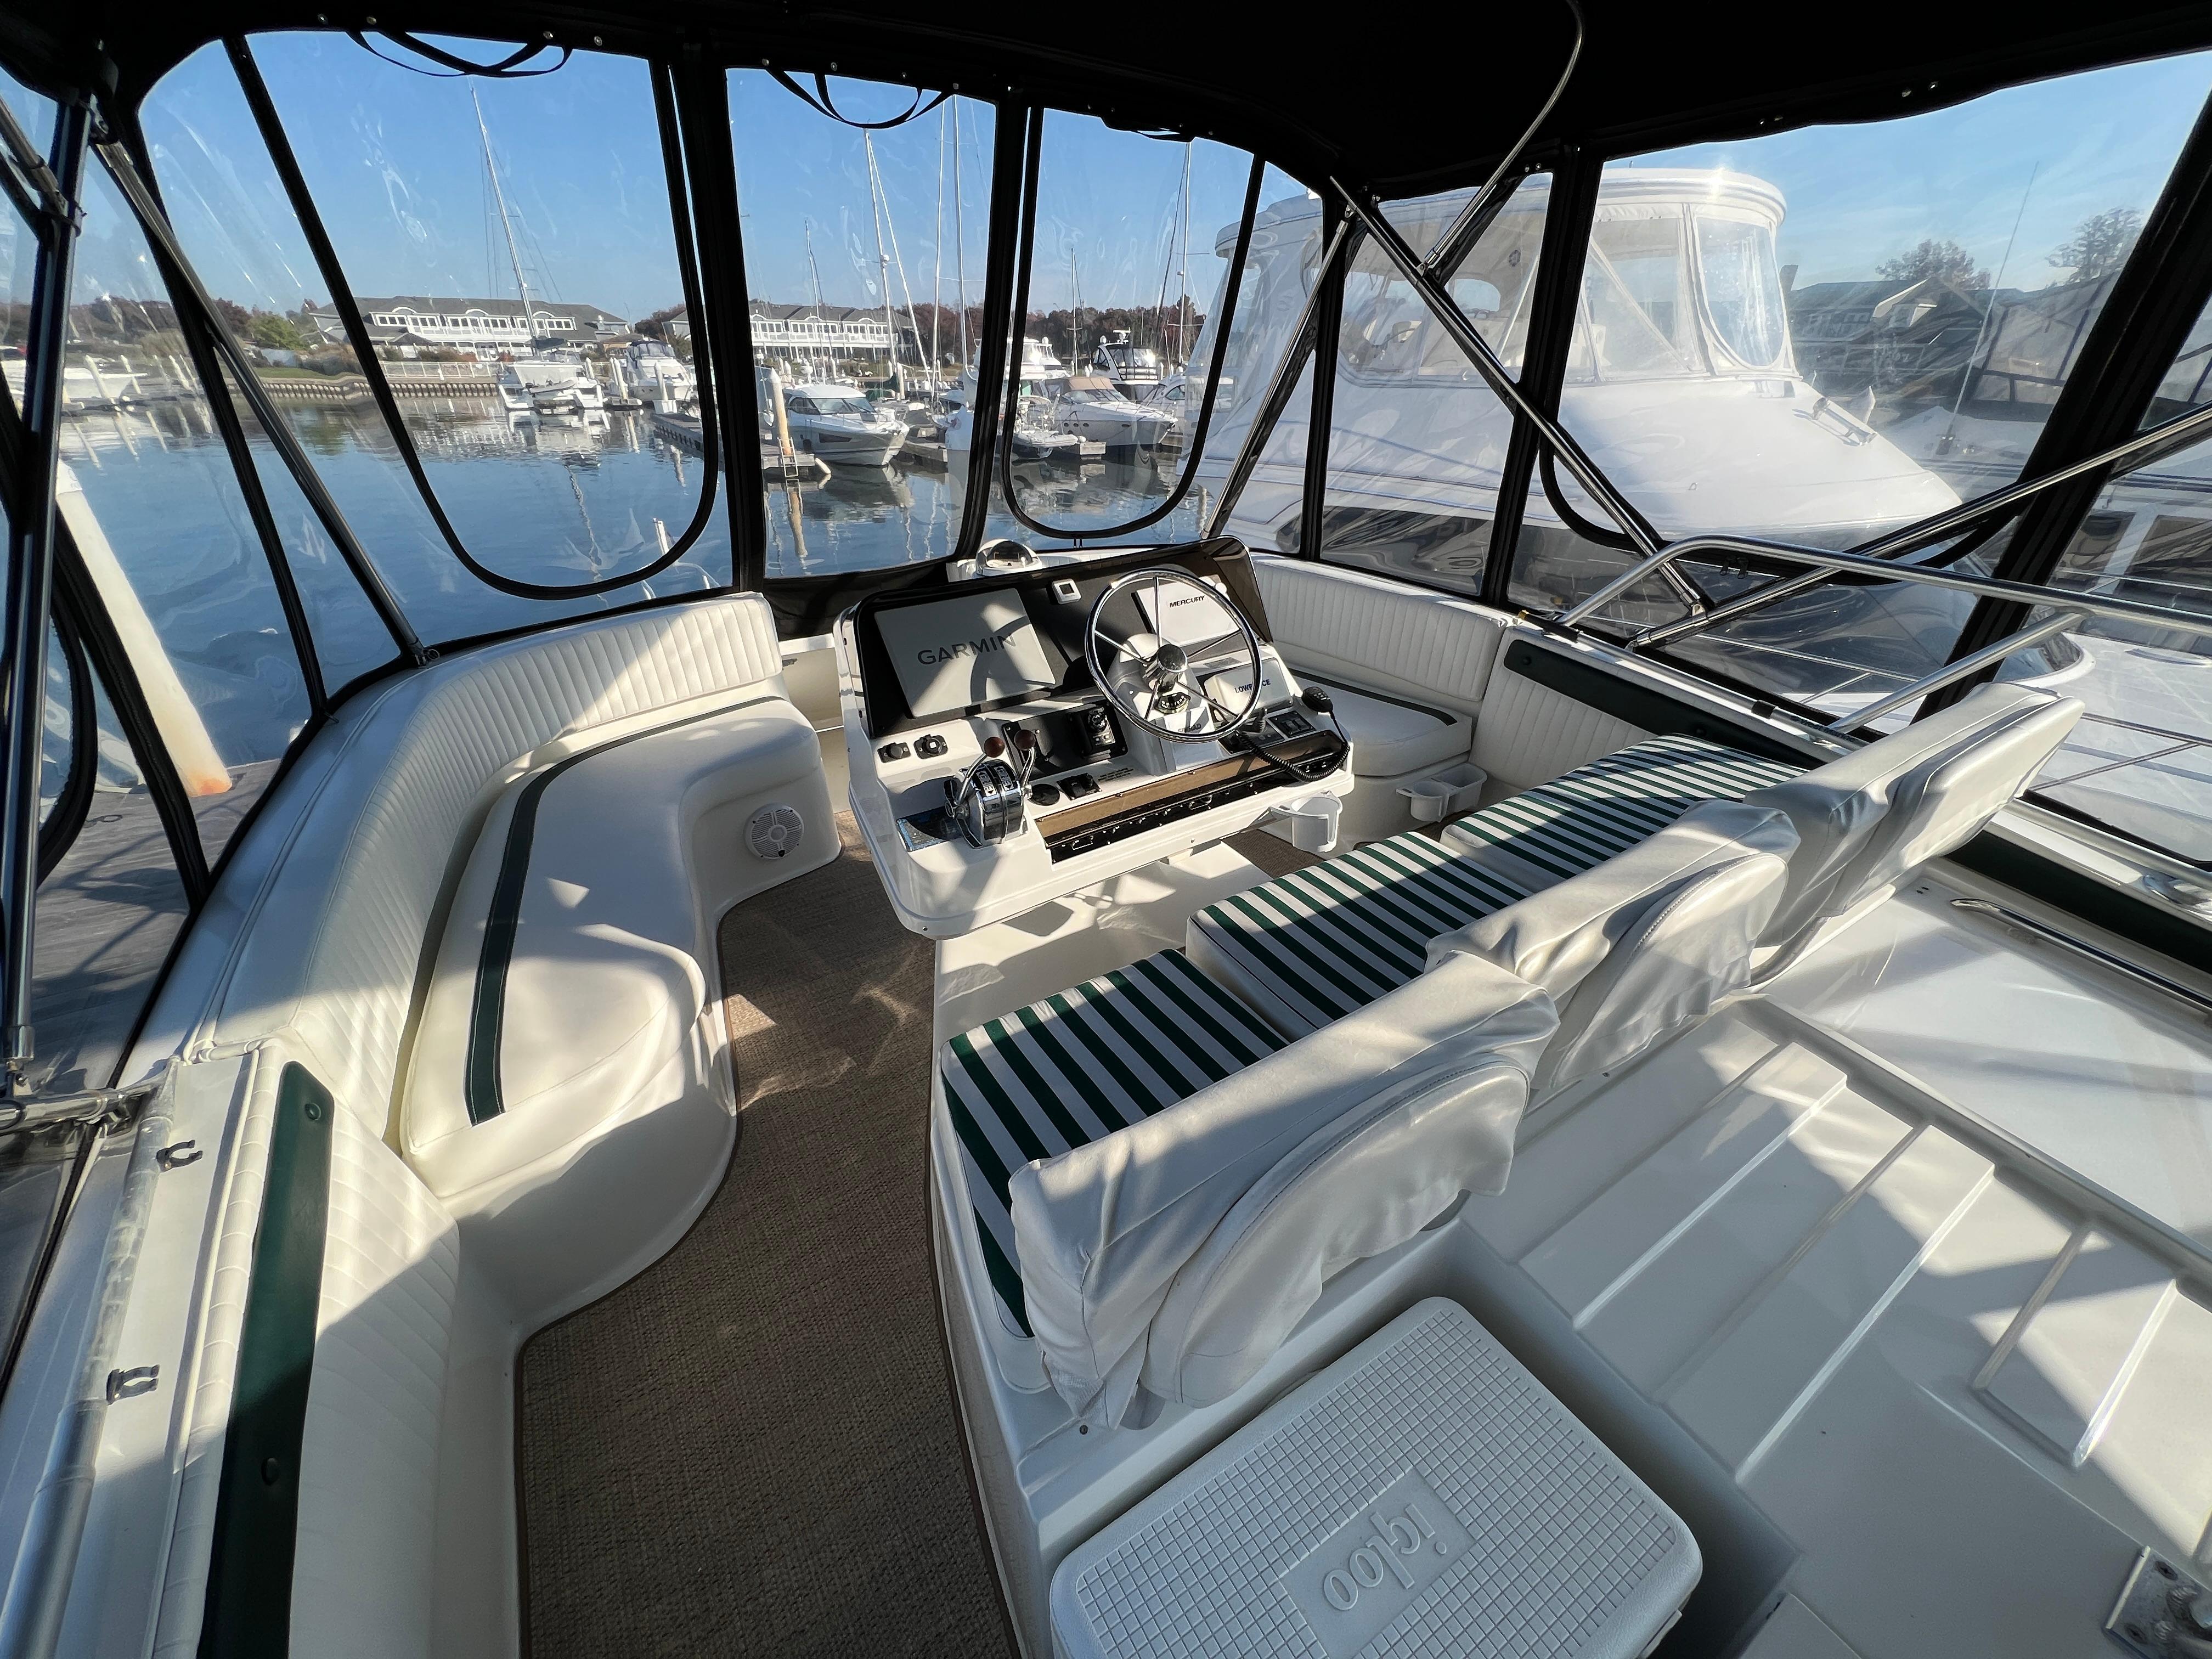 CONSULTANSEA Yacht Brokers Of Annapolis